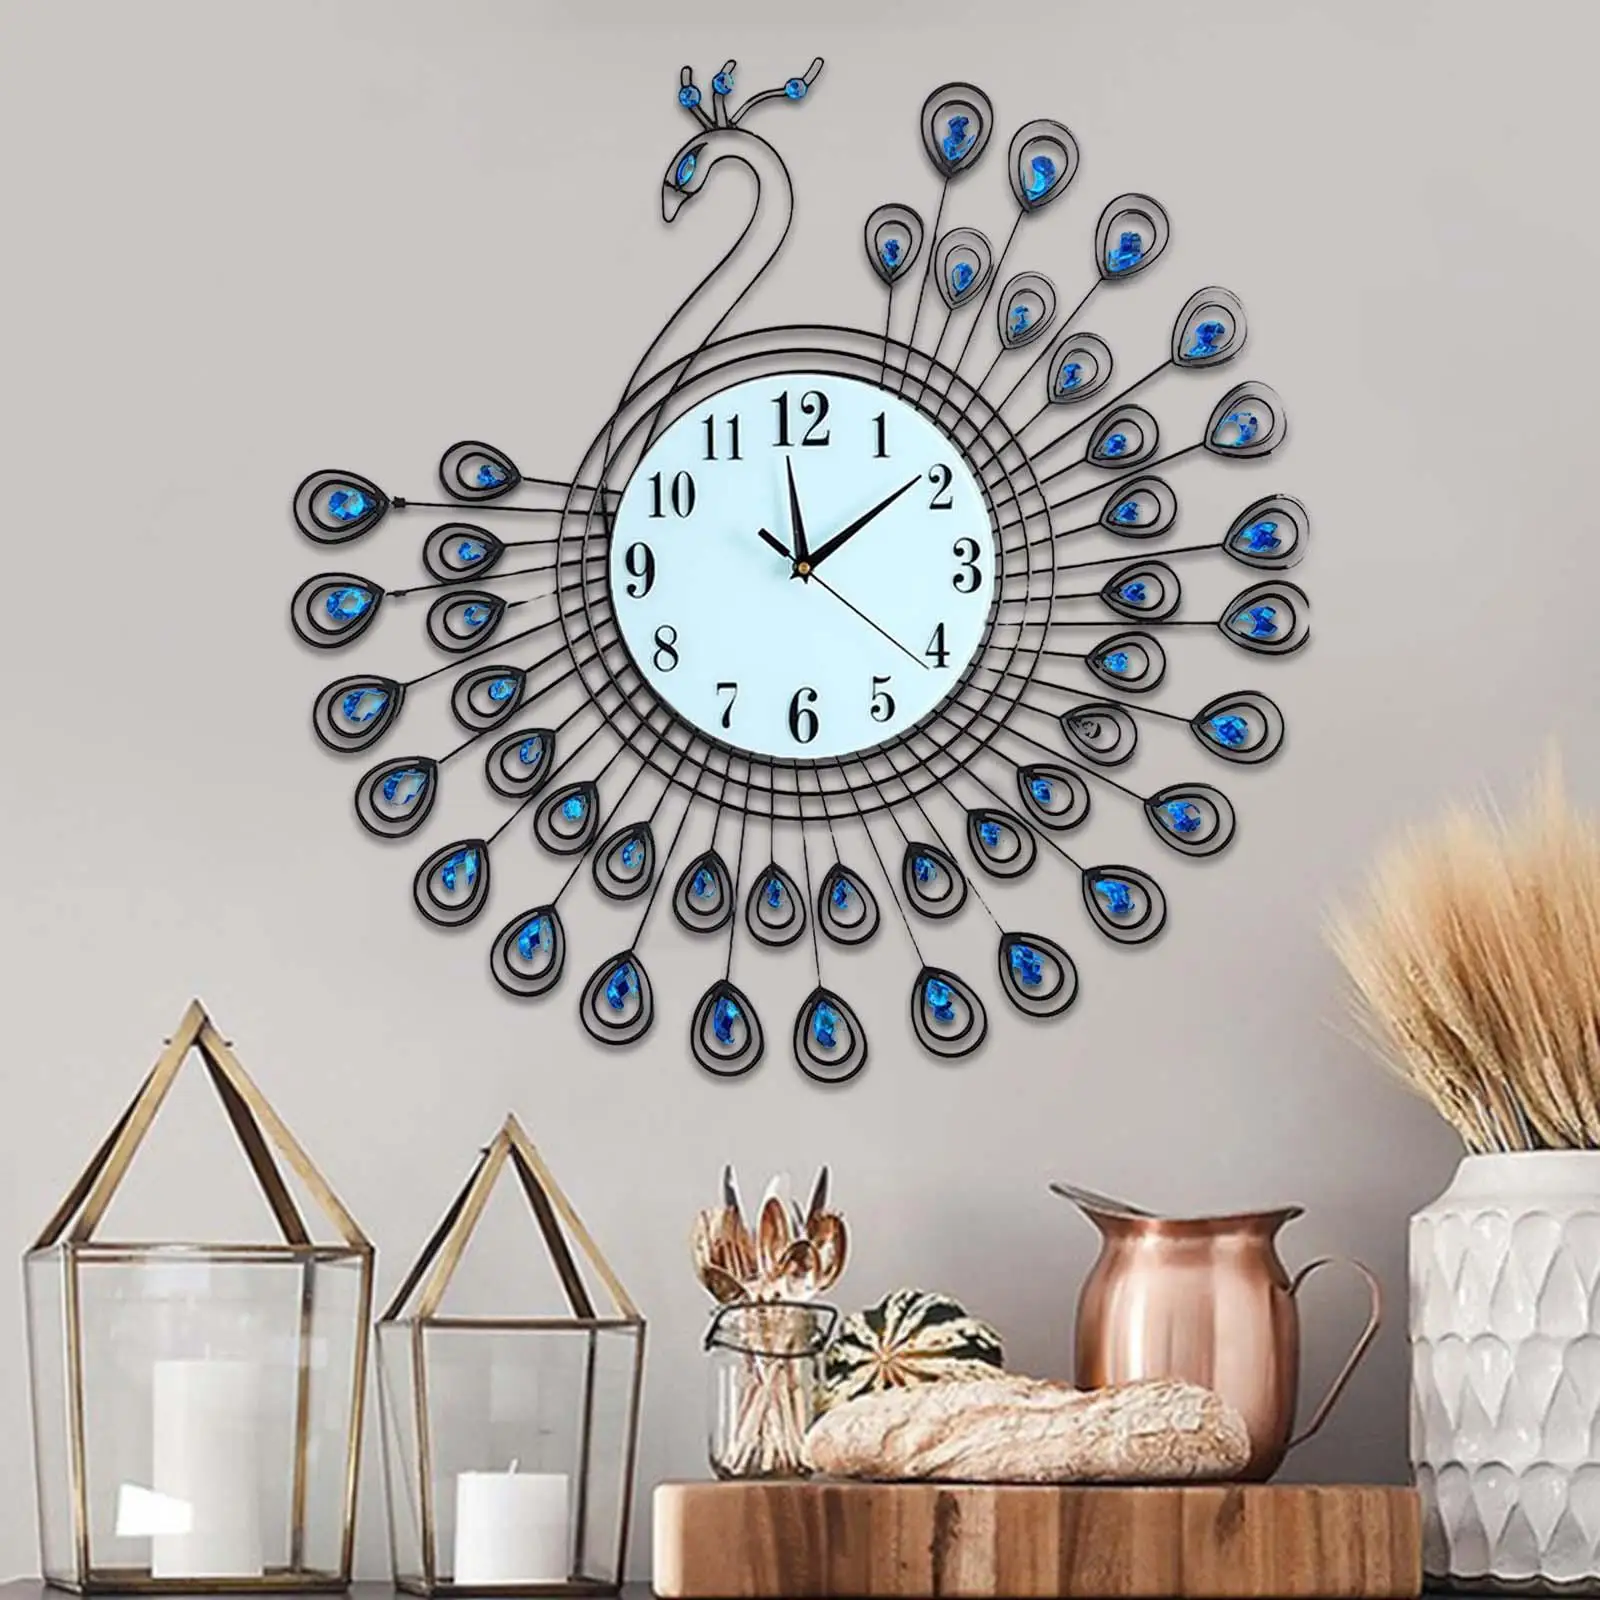 Large Wall Clock for Living Room Decor, Silent Decorative Clock for Kitchen Dining Room Decoration